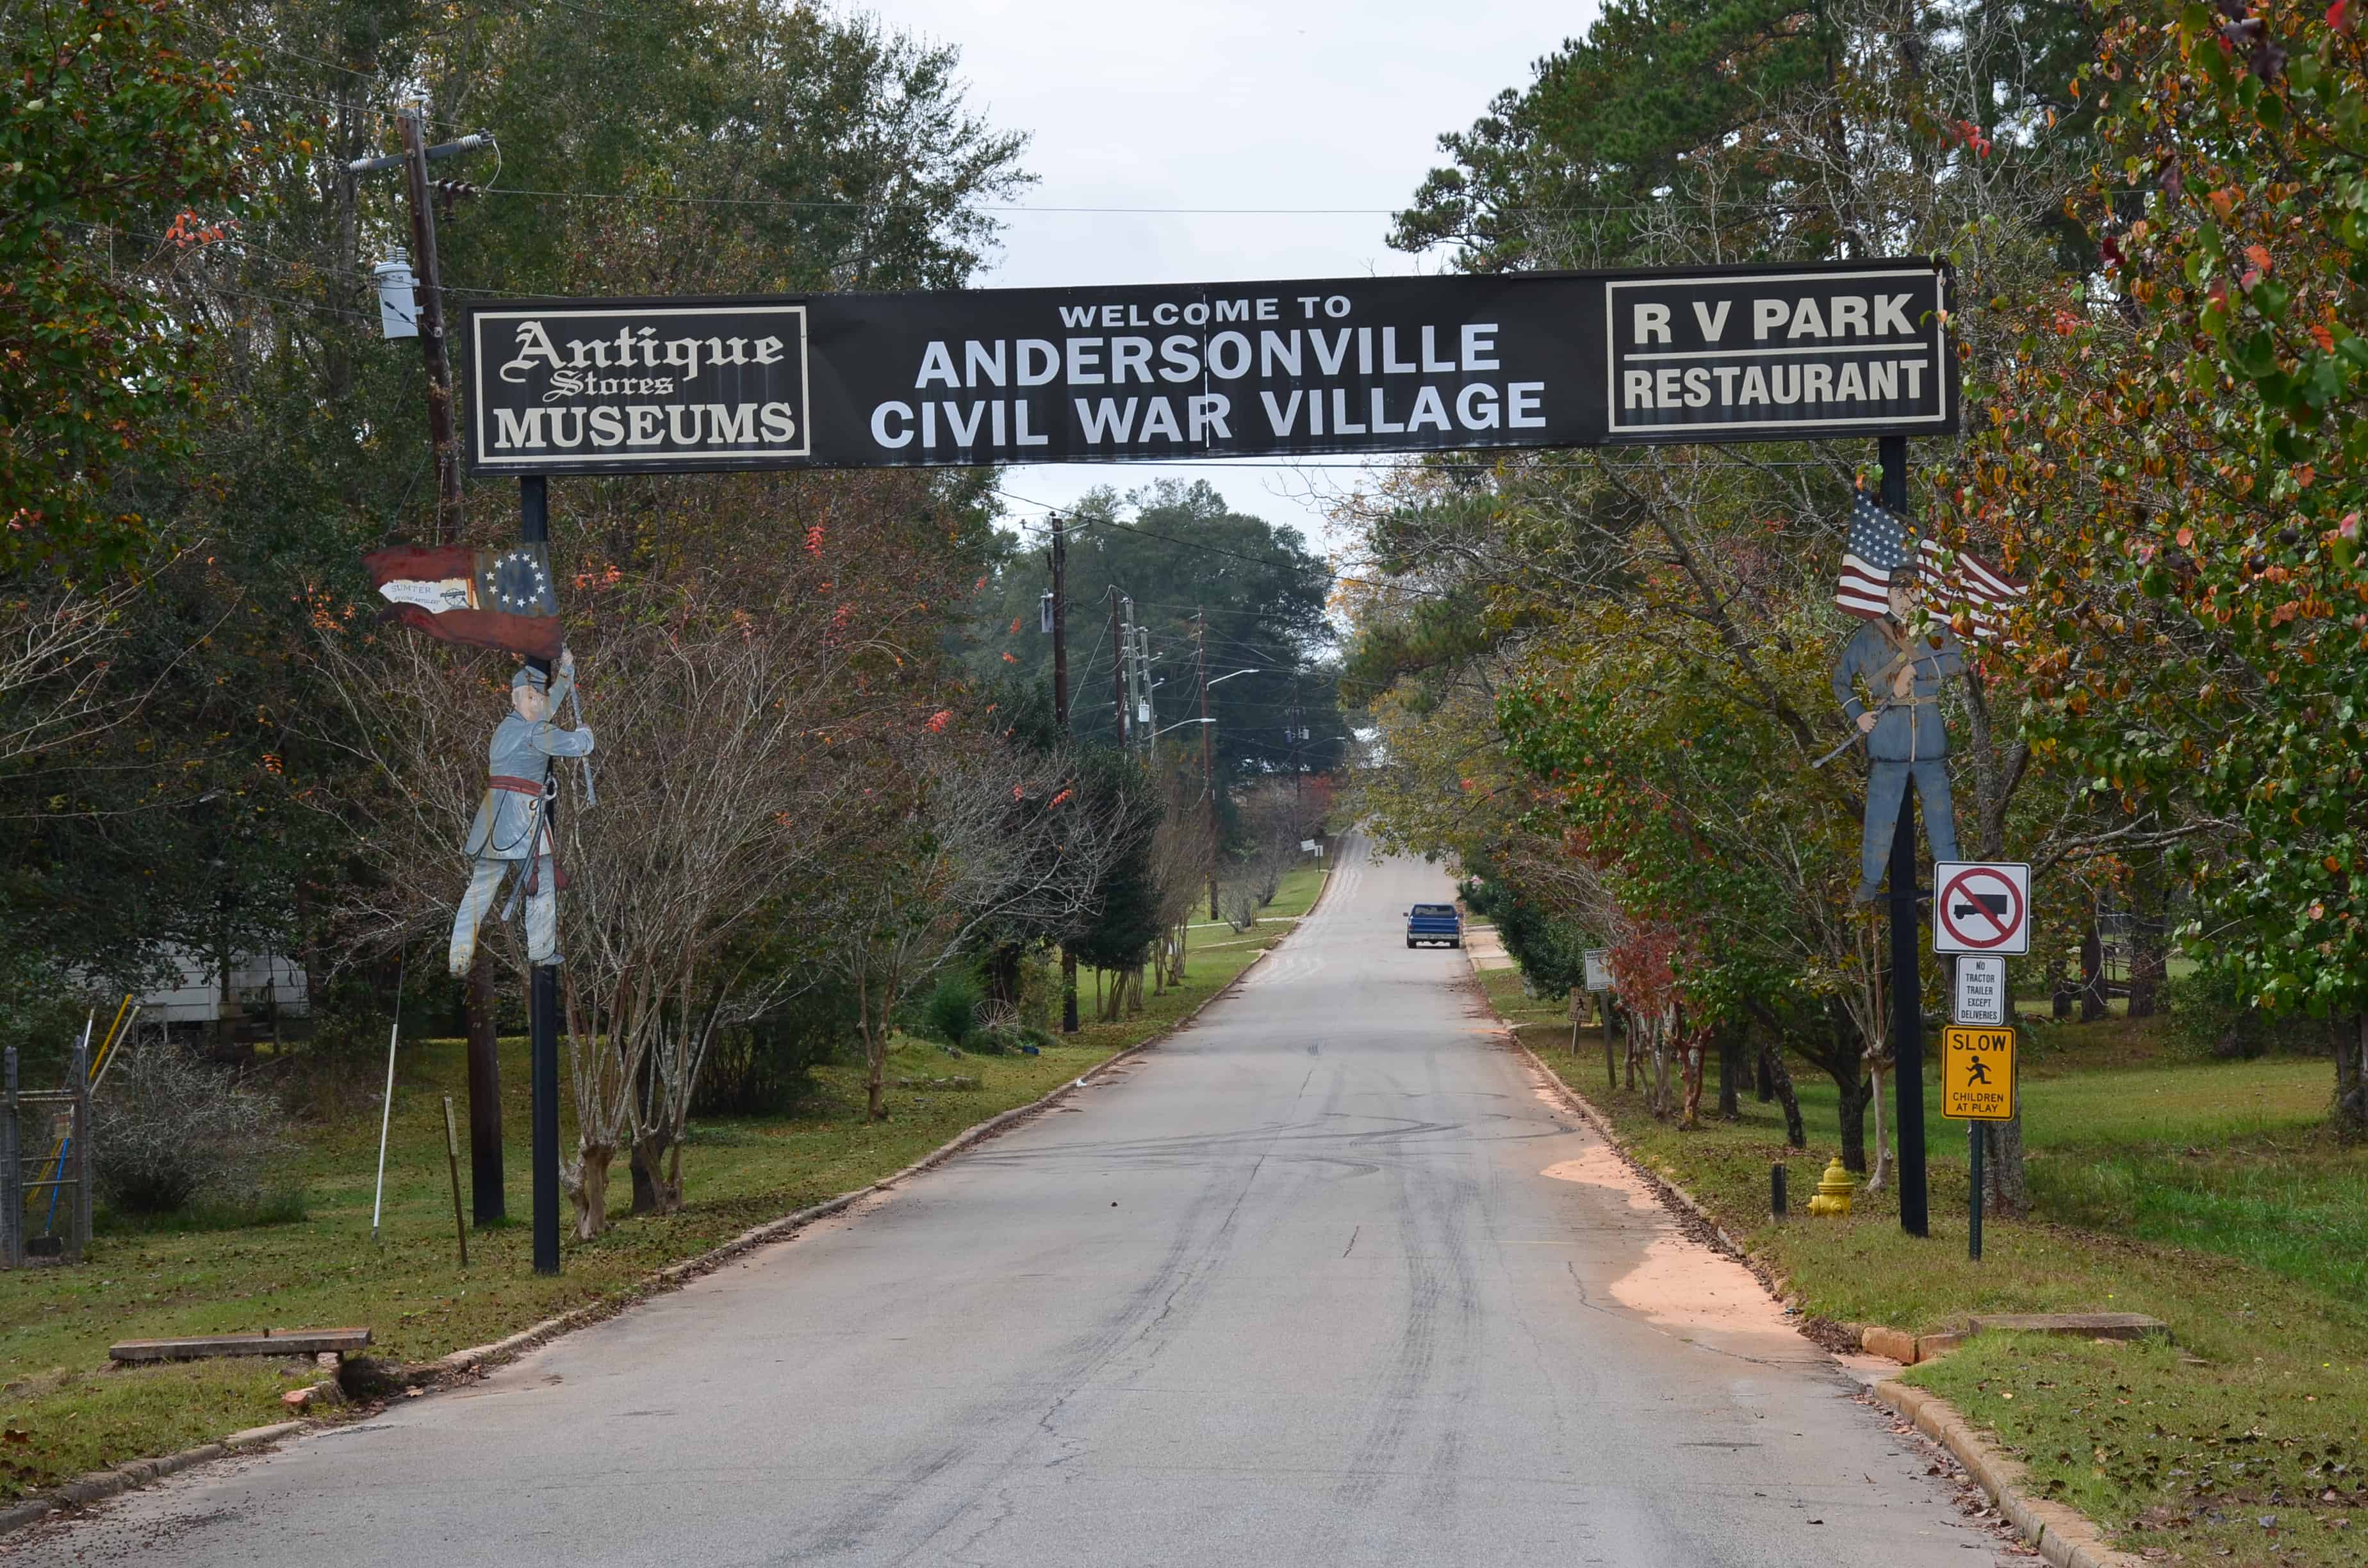 Entrance to Andersonville, Georgia